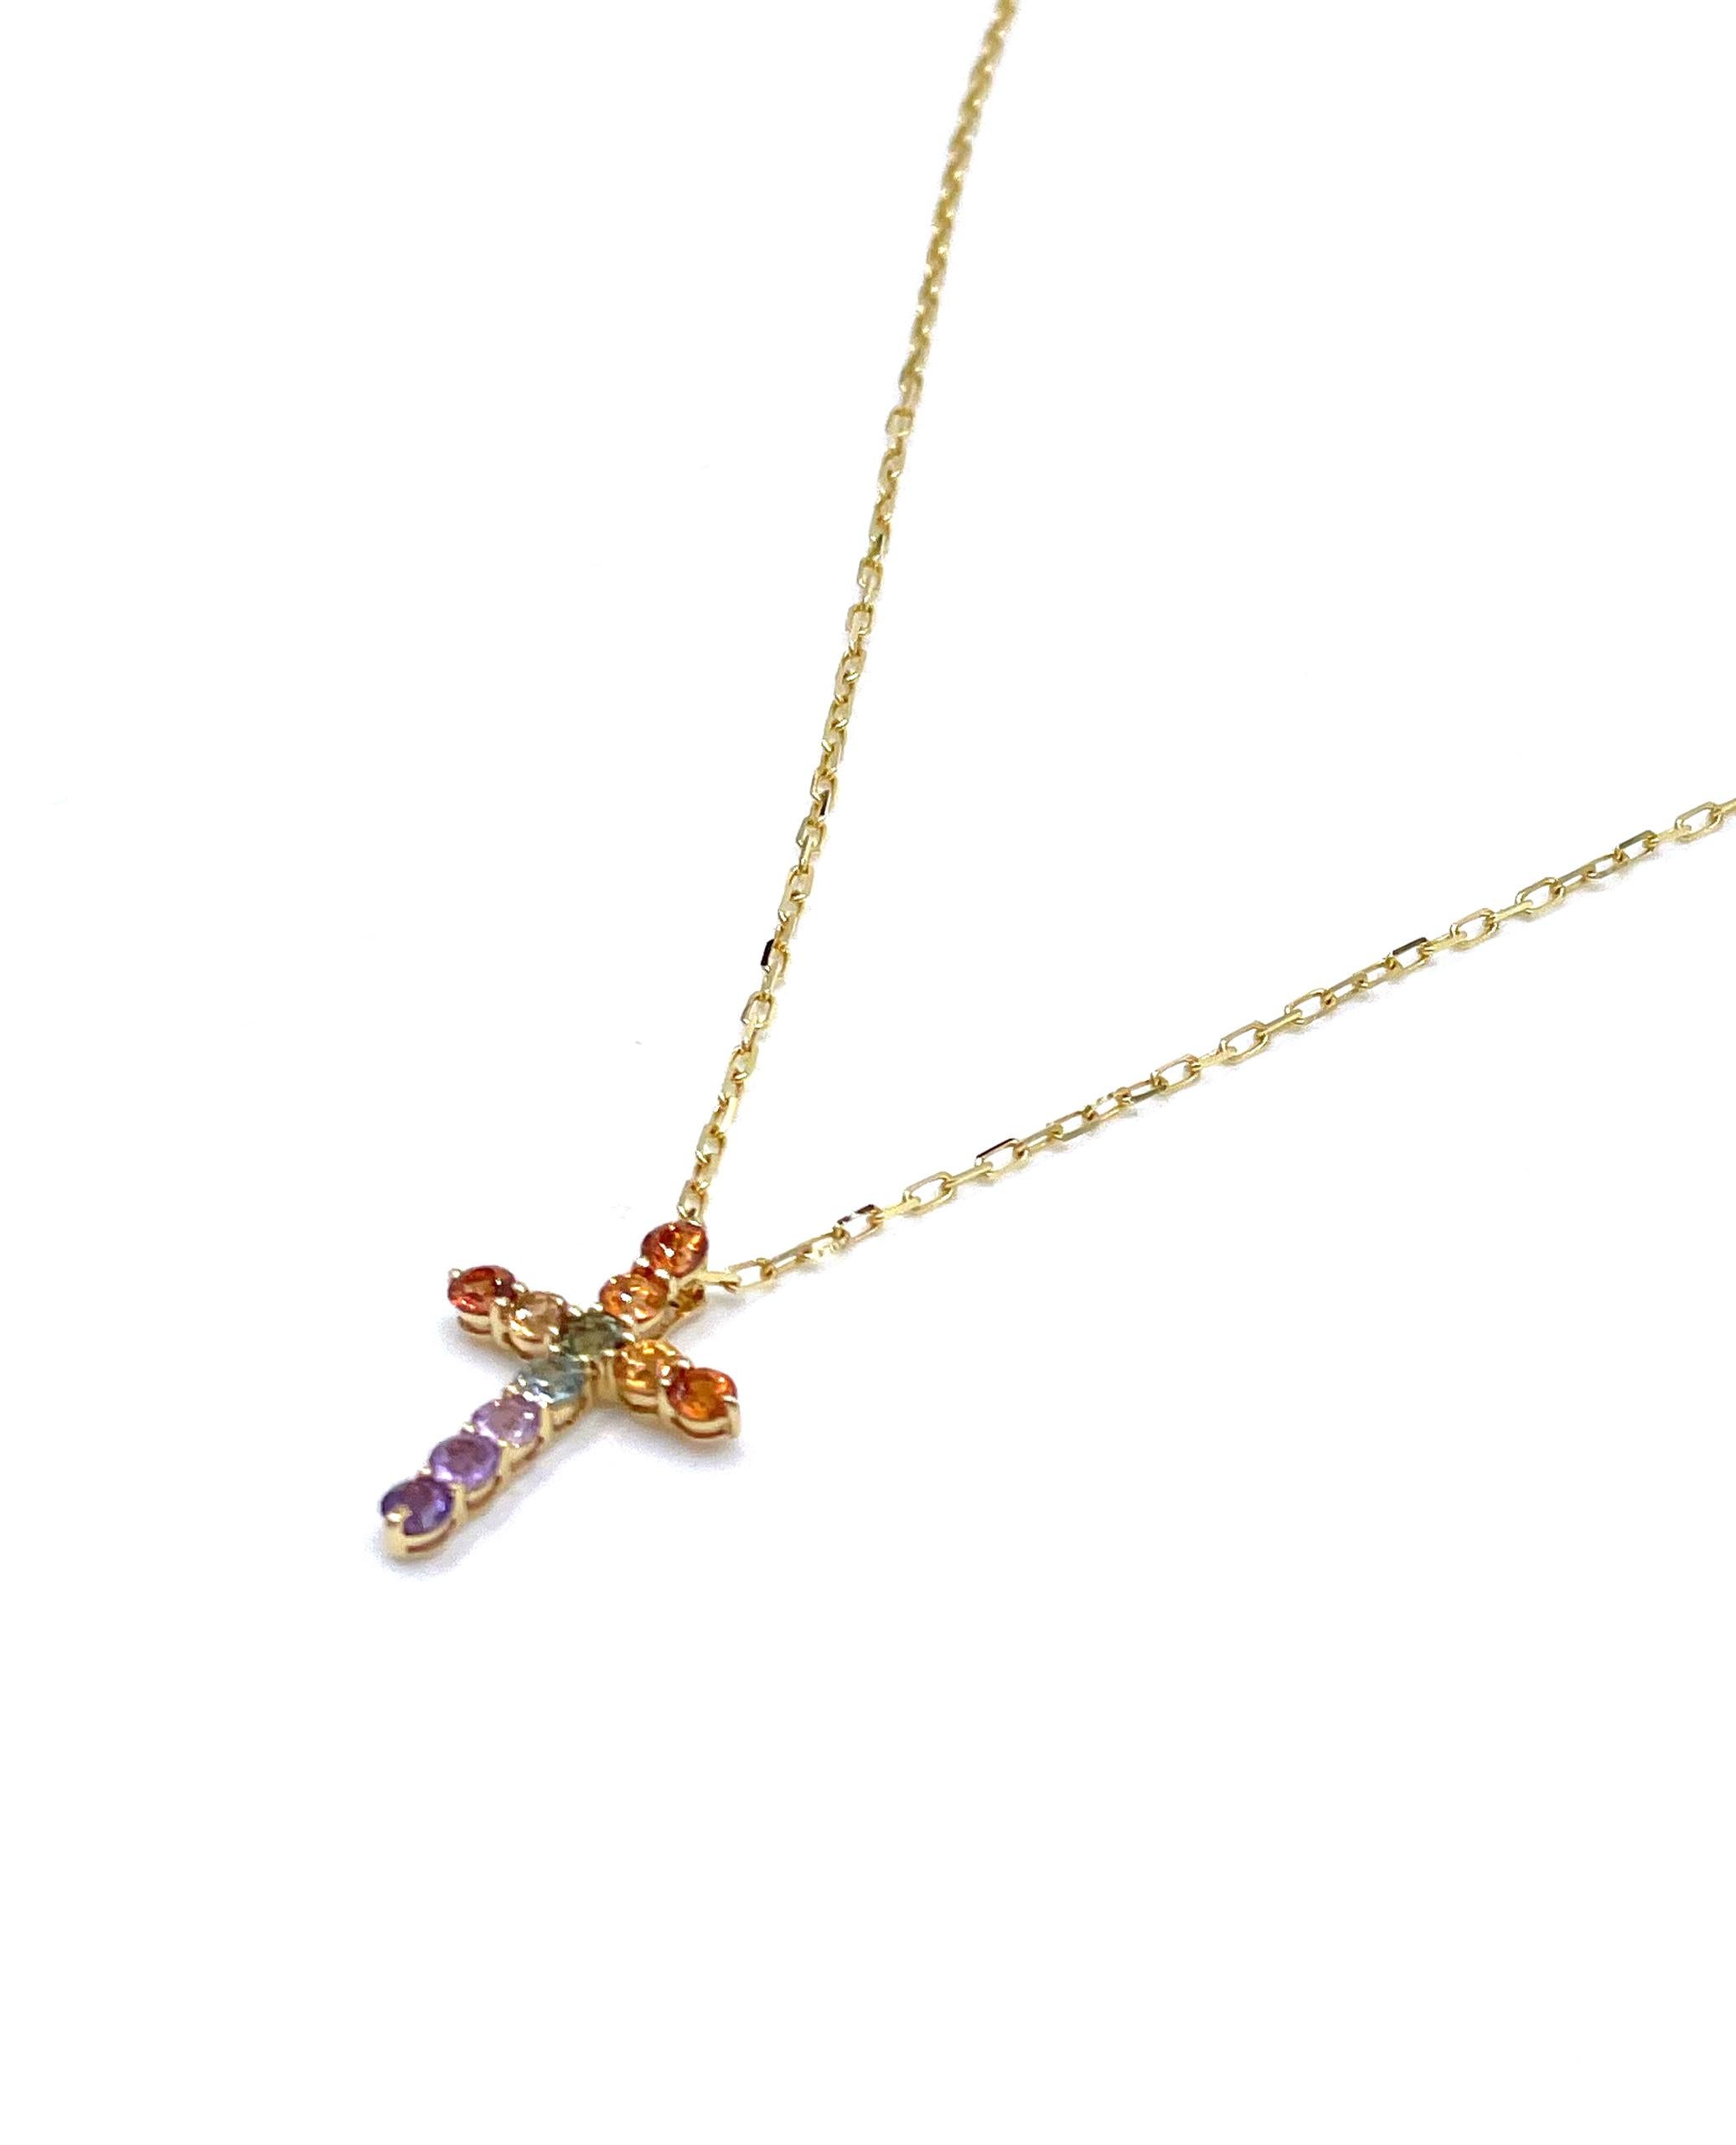 18K yellow gold cross necklace with 0.78 carat rainbow colored sapphires.

* Can be worn 16 or 18 inches long.
* Lobster lock closure.